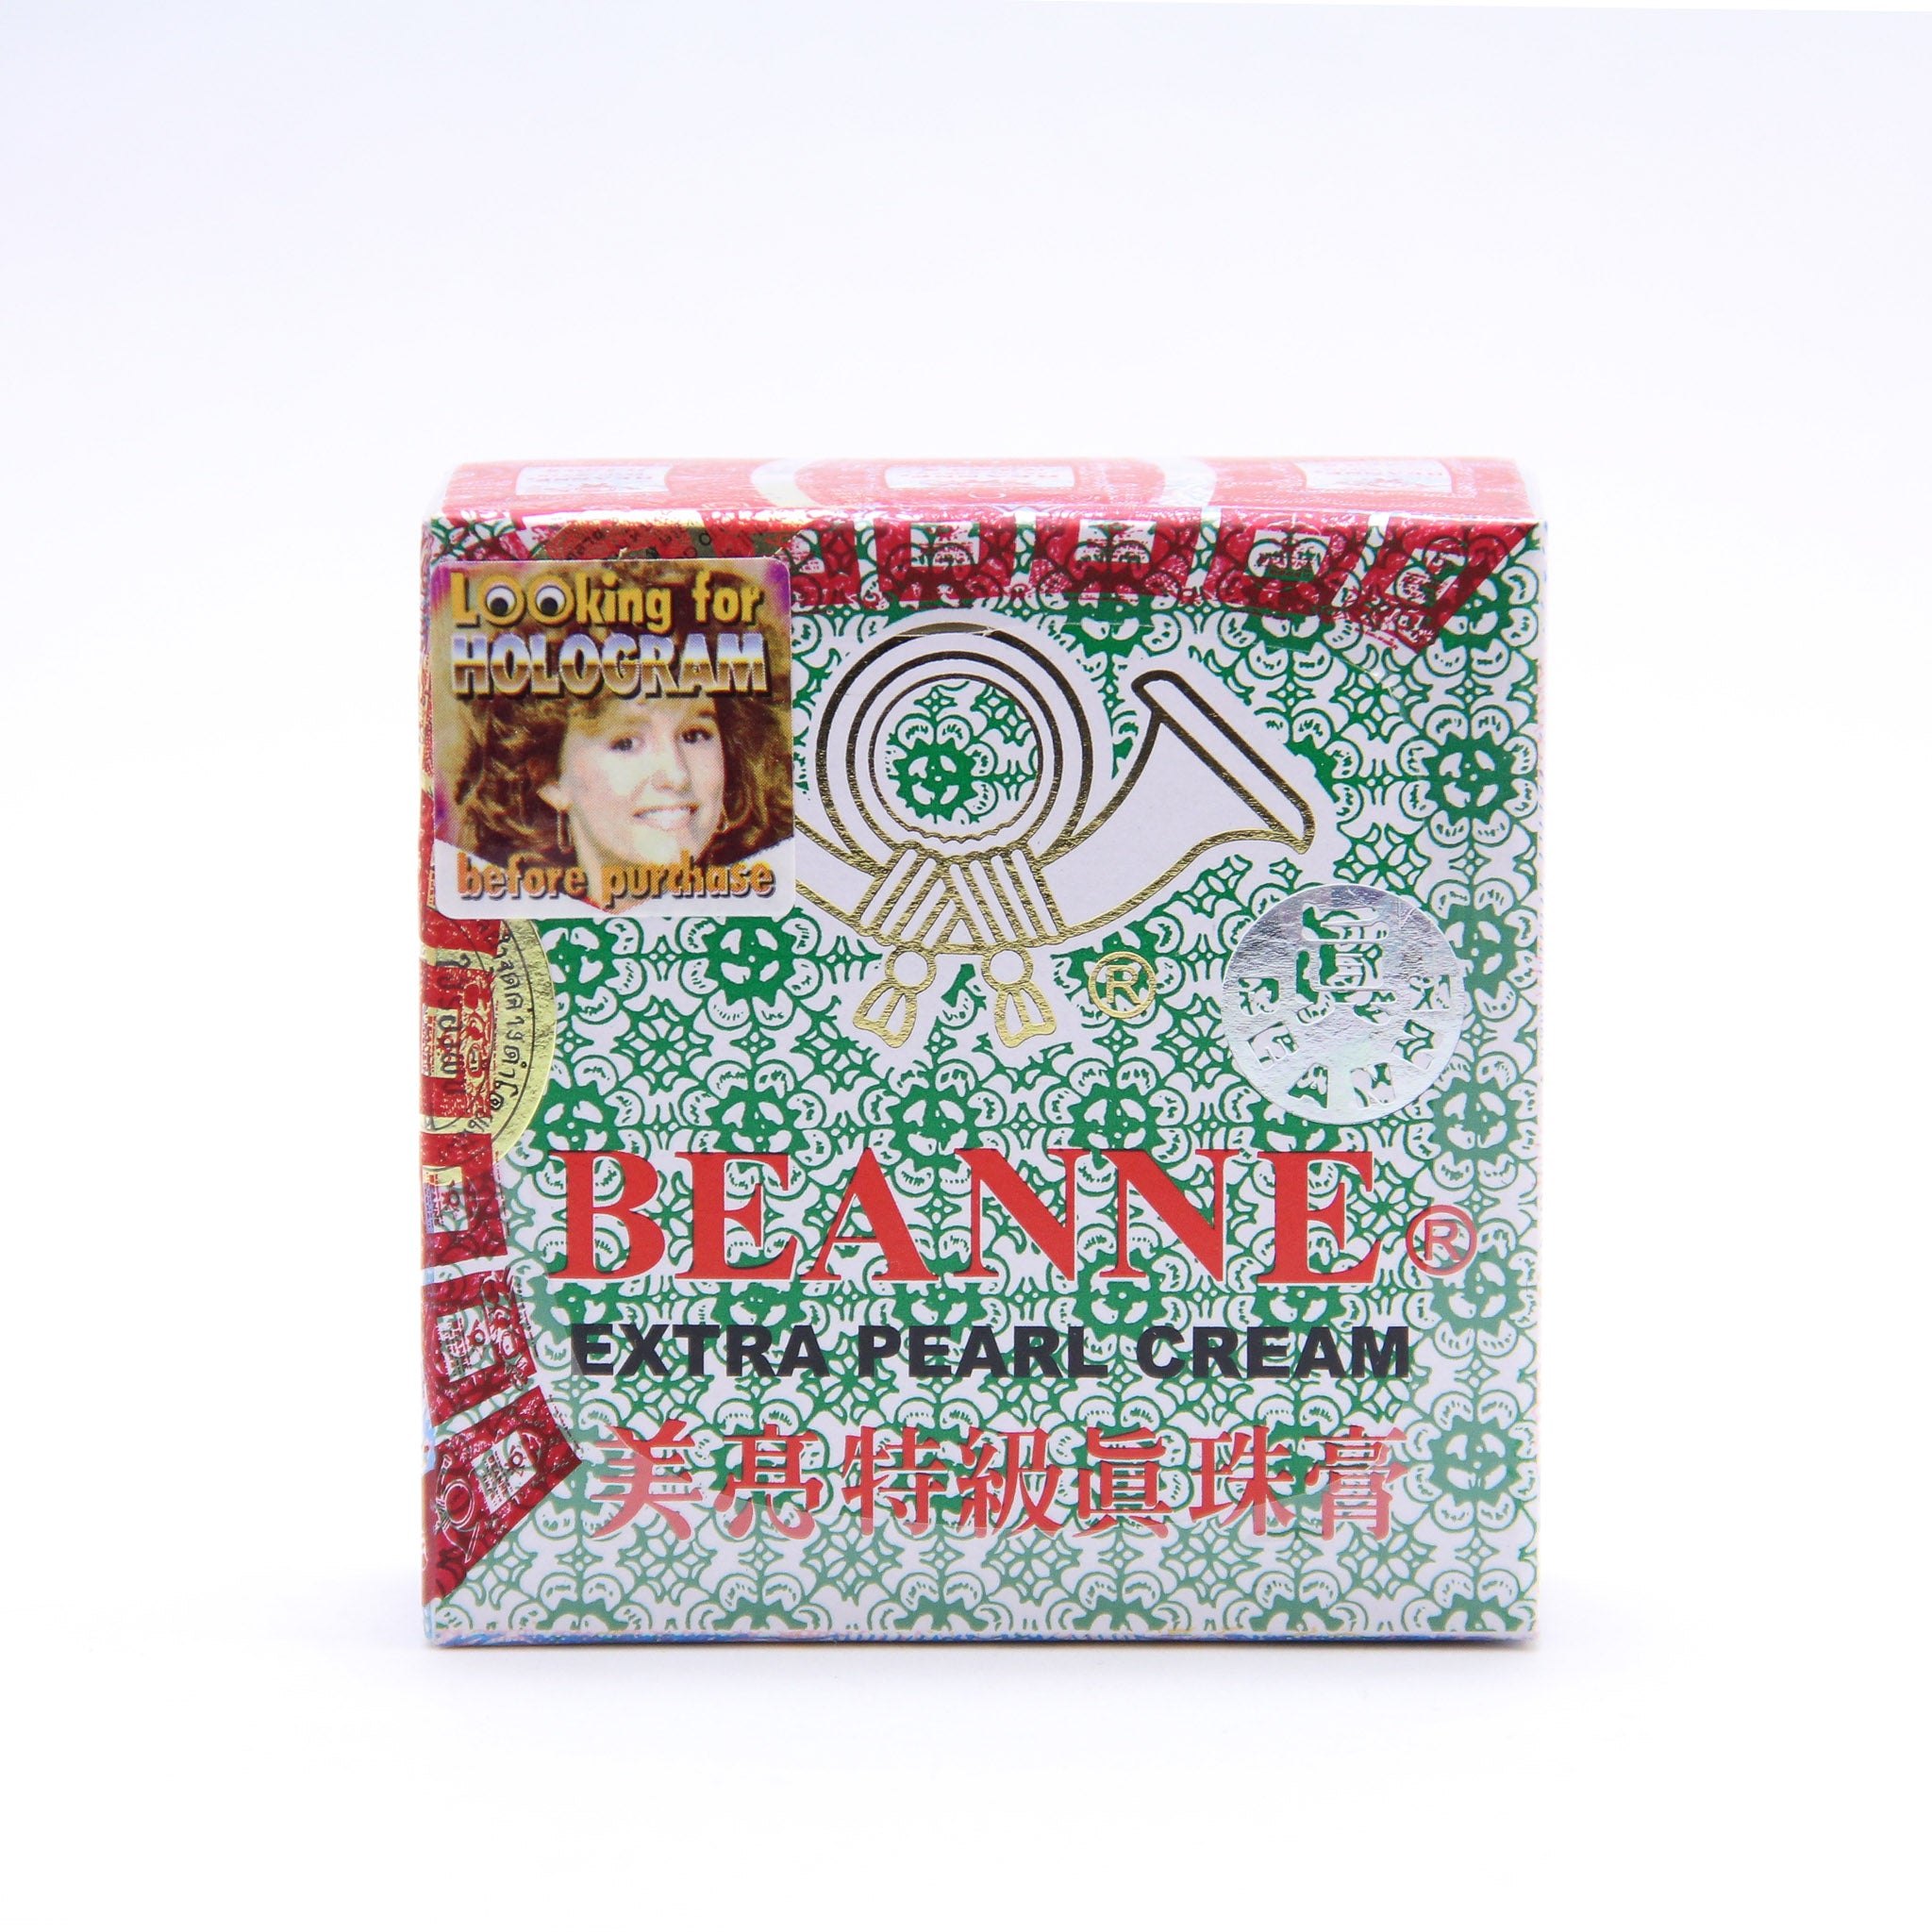 Beanne Extra Peal Cream - Green (For Acne), 0.3 oz:   This is a highly popular skin bleaching beautifier that is sold all over Southeast Asia. It contains the finest pearl powder and other natural ingredients, which help to keep the skin looking young, smooth and fresh. It also helps to fade dark spots on your skin. Beanne Extra Pearl Cream is a good choice to reduce the appearance of freckles, pimples, blotches, wrinkles and sunburn.